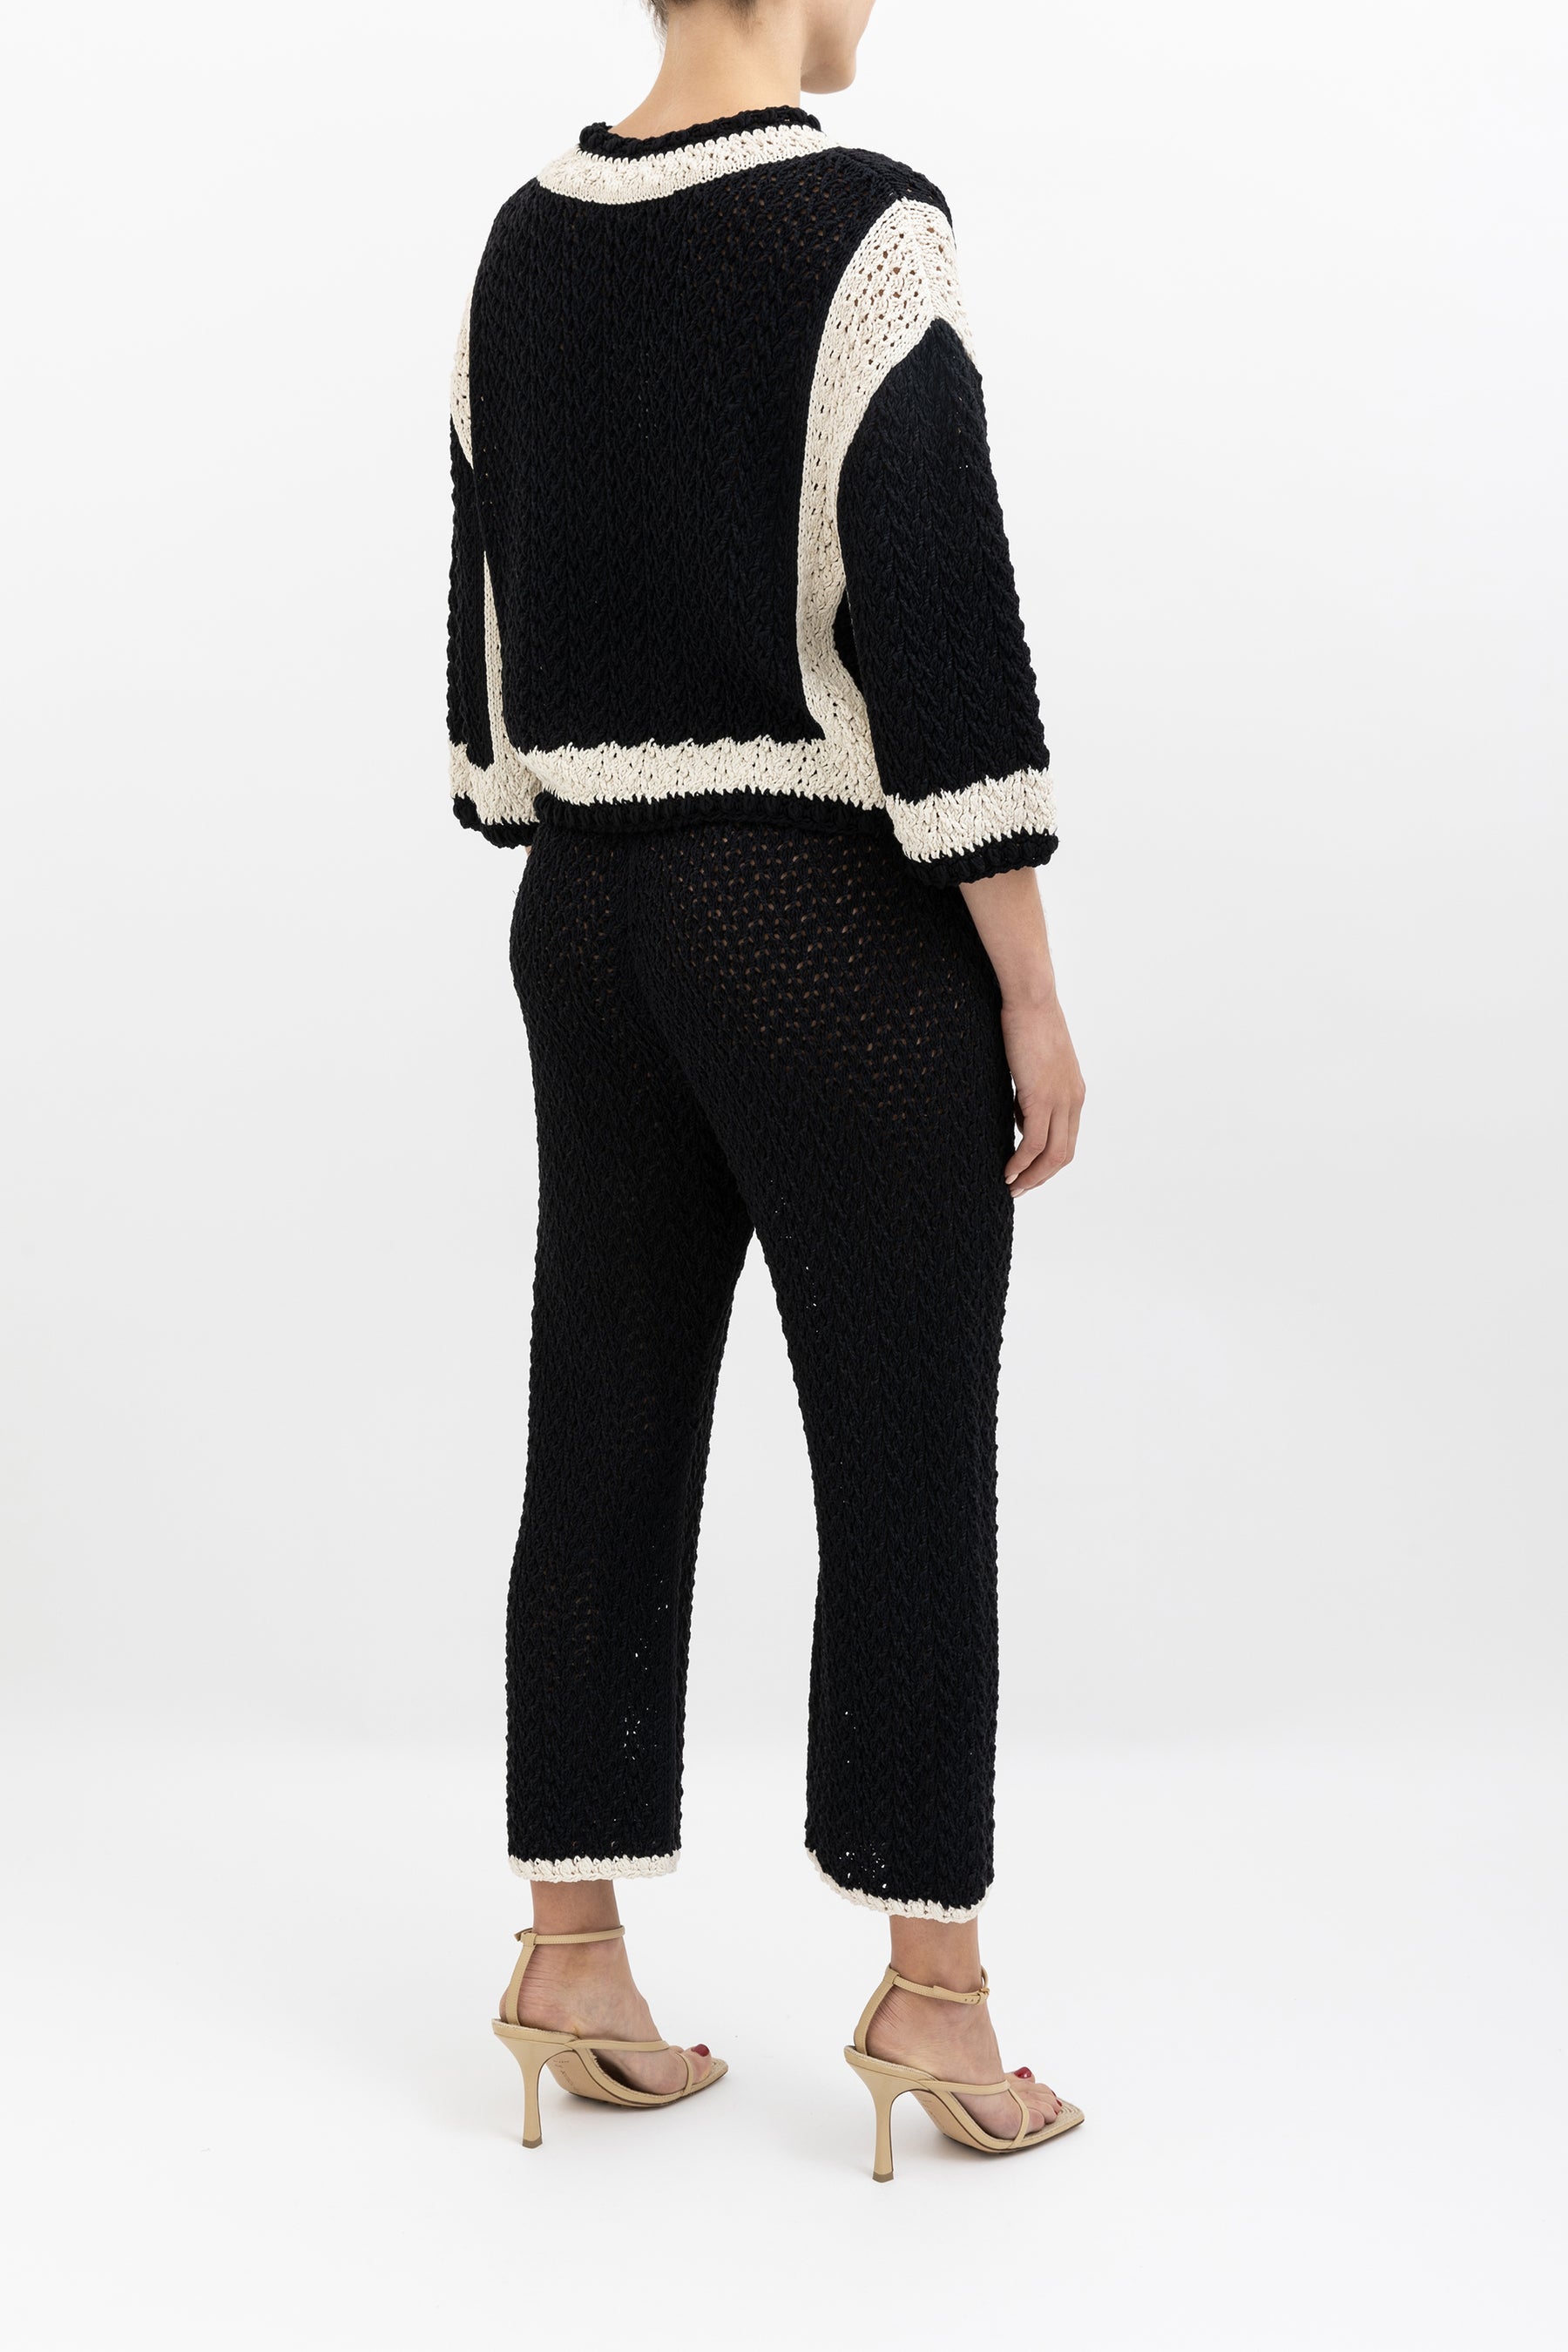 Knitted Cardigan Top and Pant Set